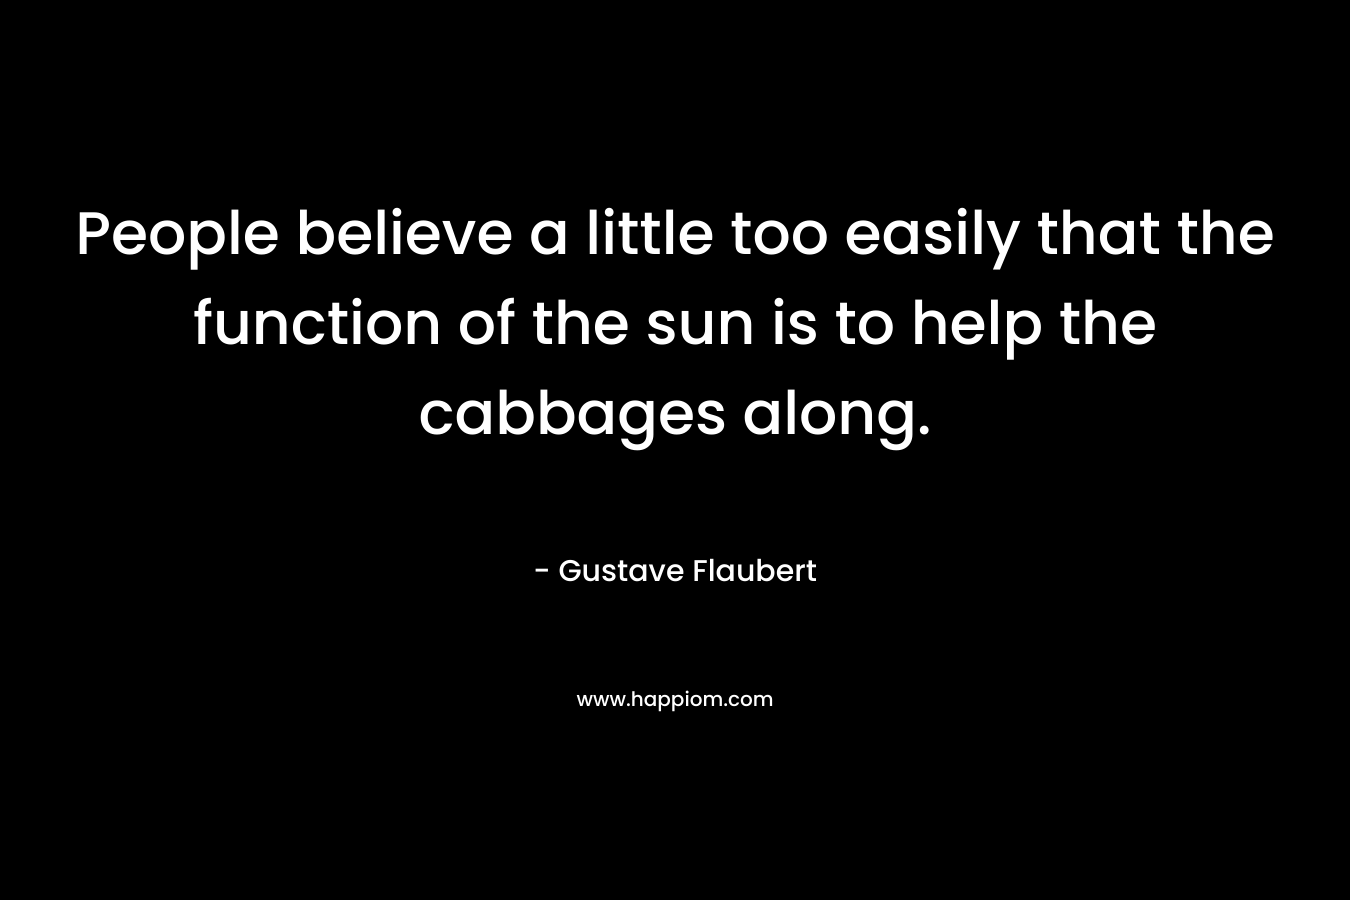 People believe a little too easily that the function of the sun is to help the cabbages along. – Gustave Flaubert